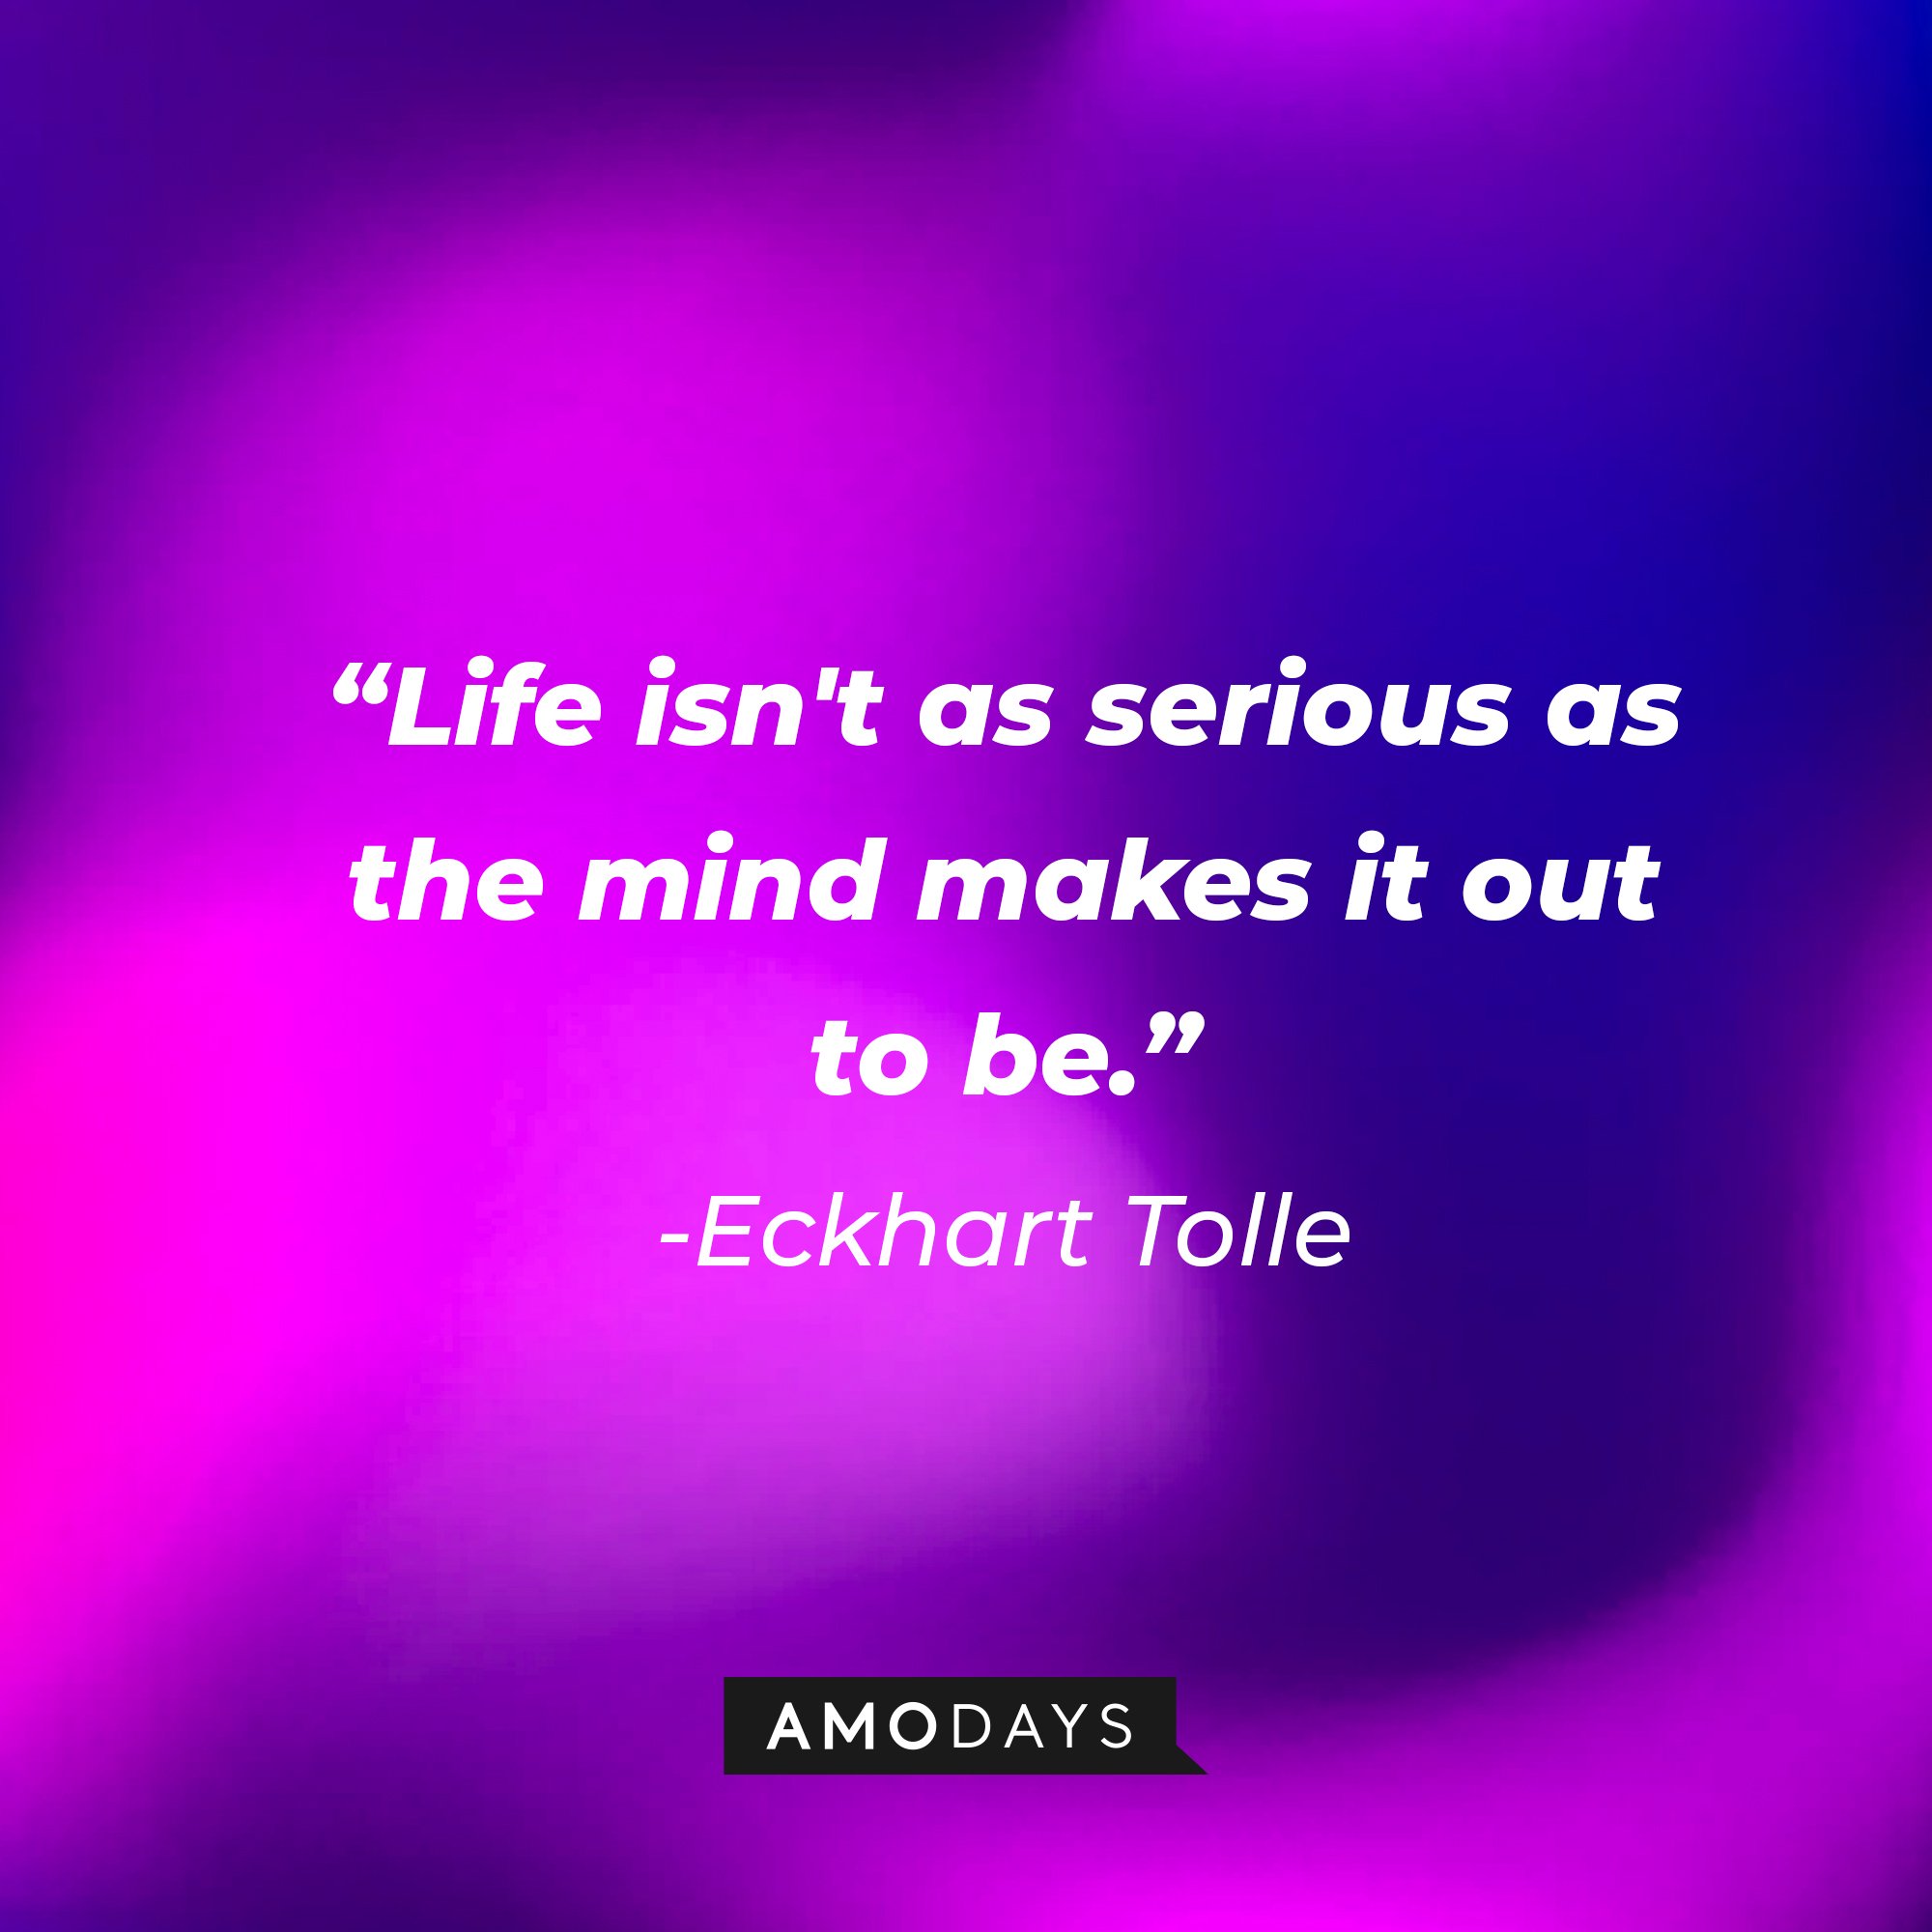 Eckhart Tolle’s quote: “Life isn't as serious as the mind makes it out to be.” | Image: AmoDays